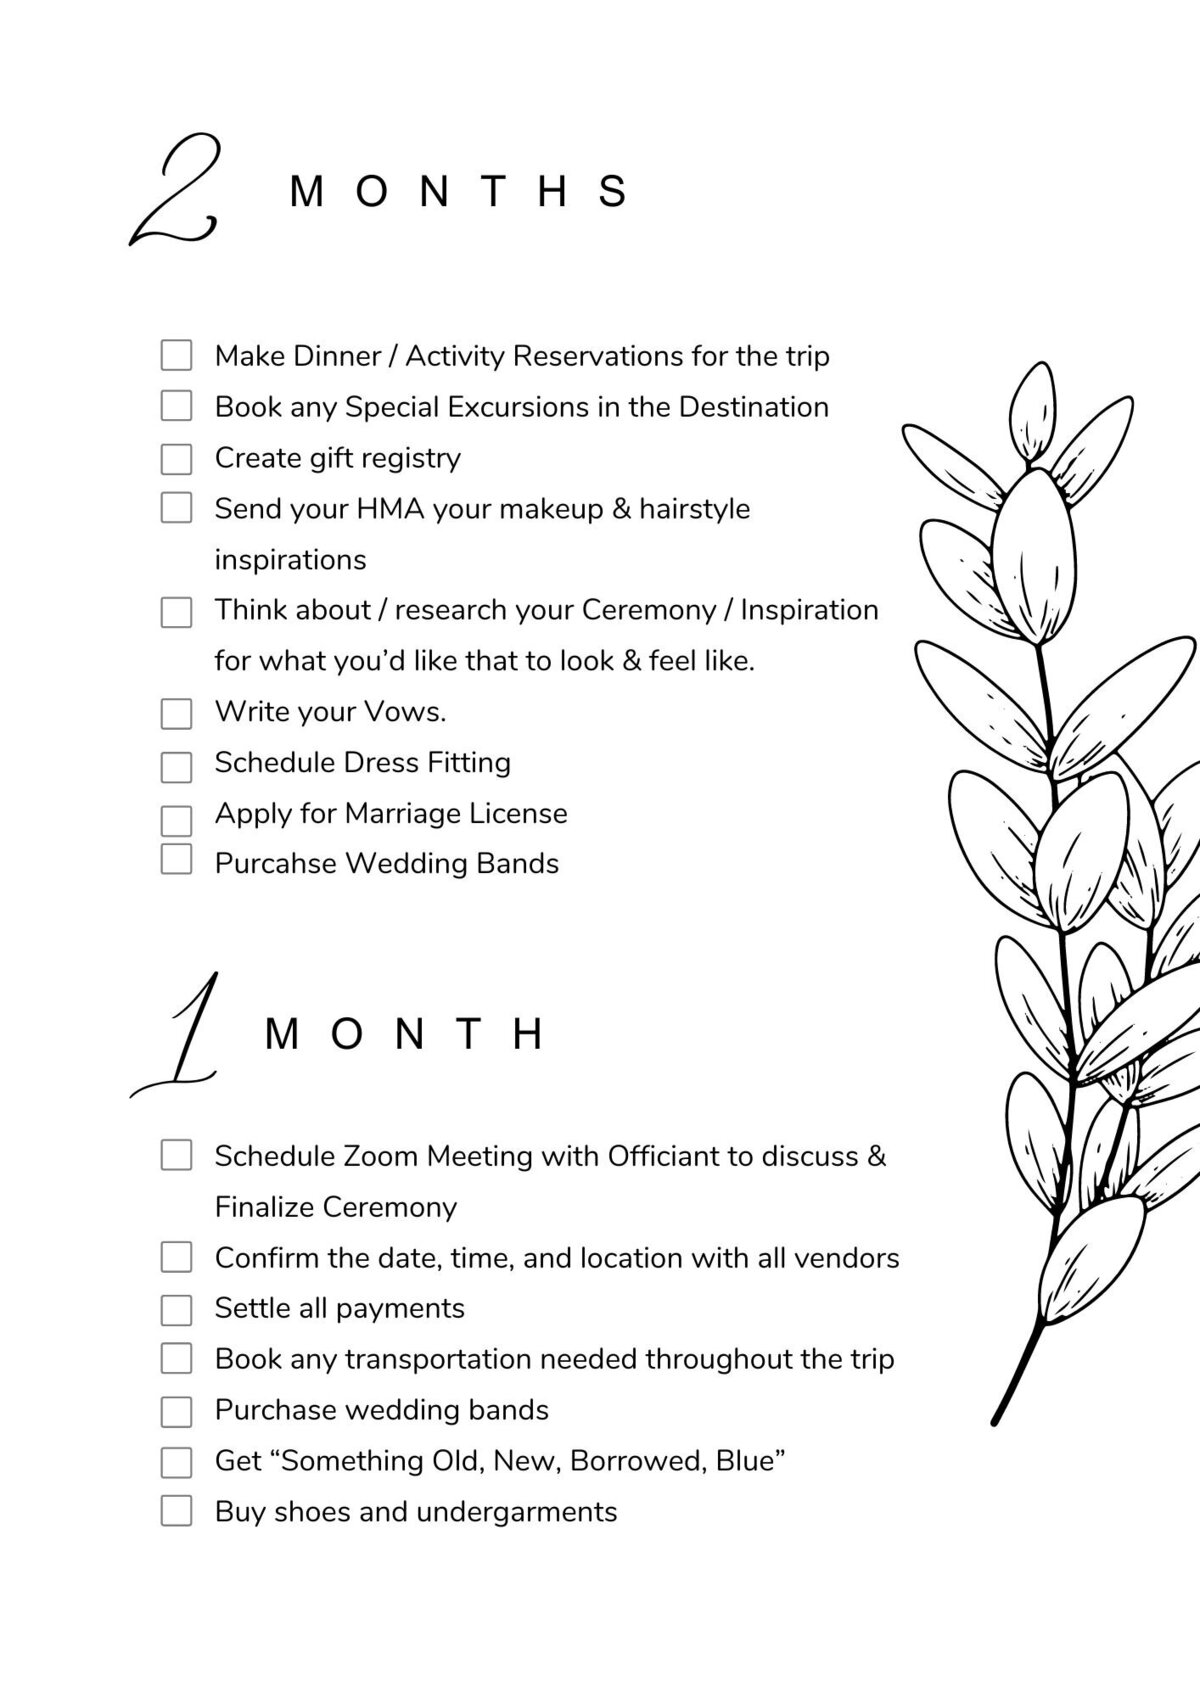 A Free Elopement Planning Guide brought to you by Asheville Wedding Photo.